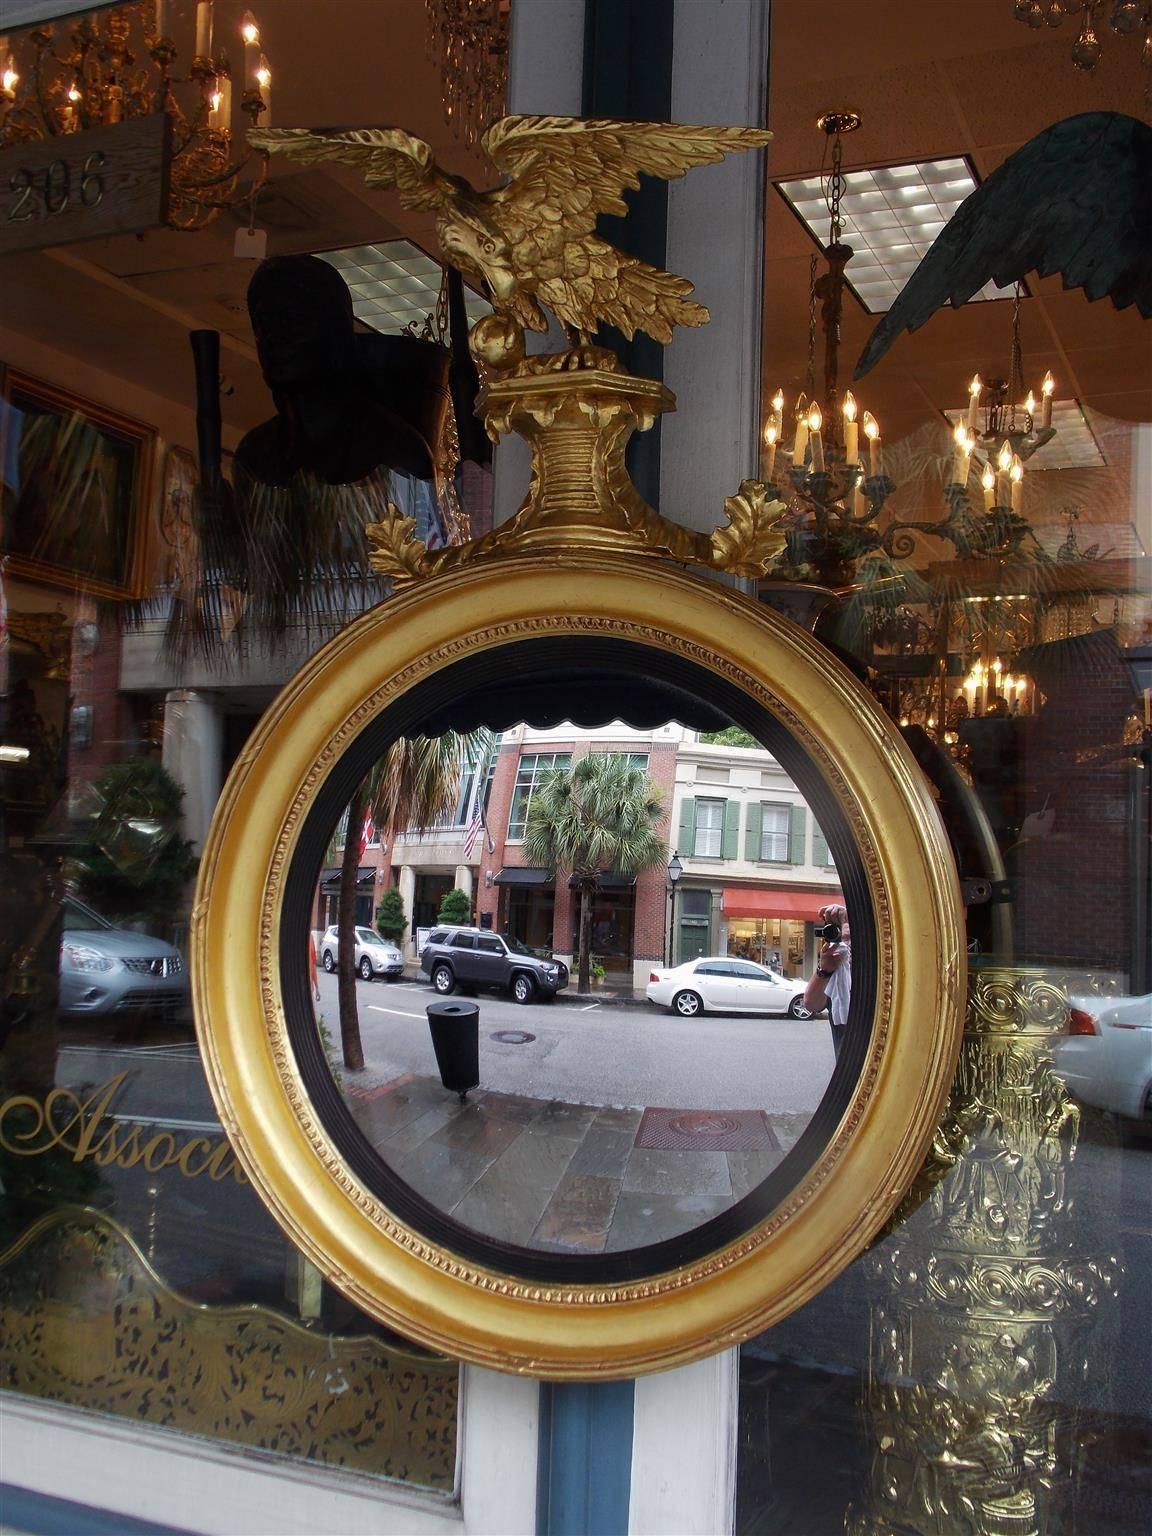 American Federal gilt convex mirror with eagle grasping ball with claw perched to flee on acanthus carved plinth, exterior reeded edge with ribbon and lambs tongue motif , and an interior ebonized reeded ring. The mirror retains the original glass